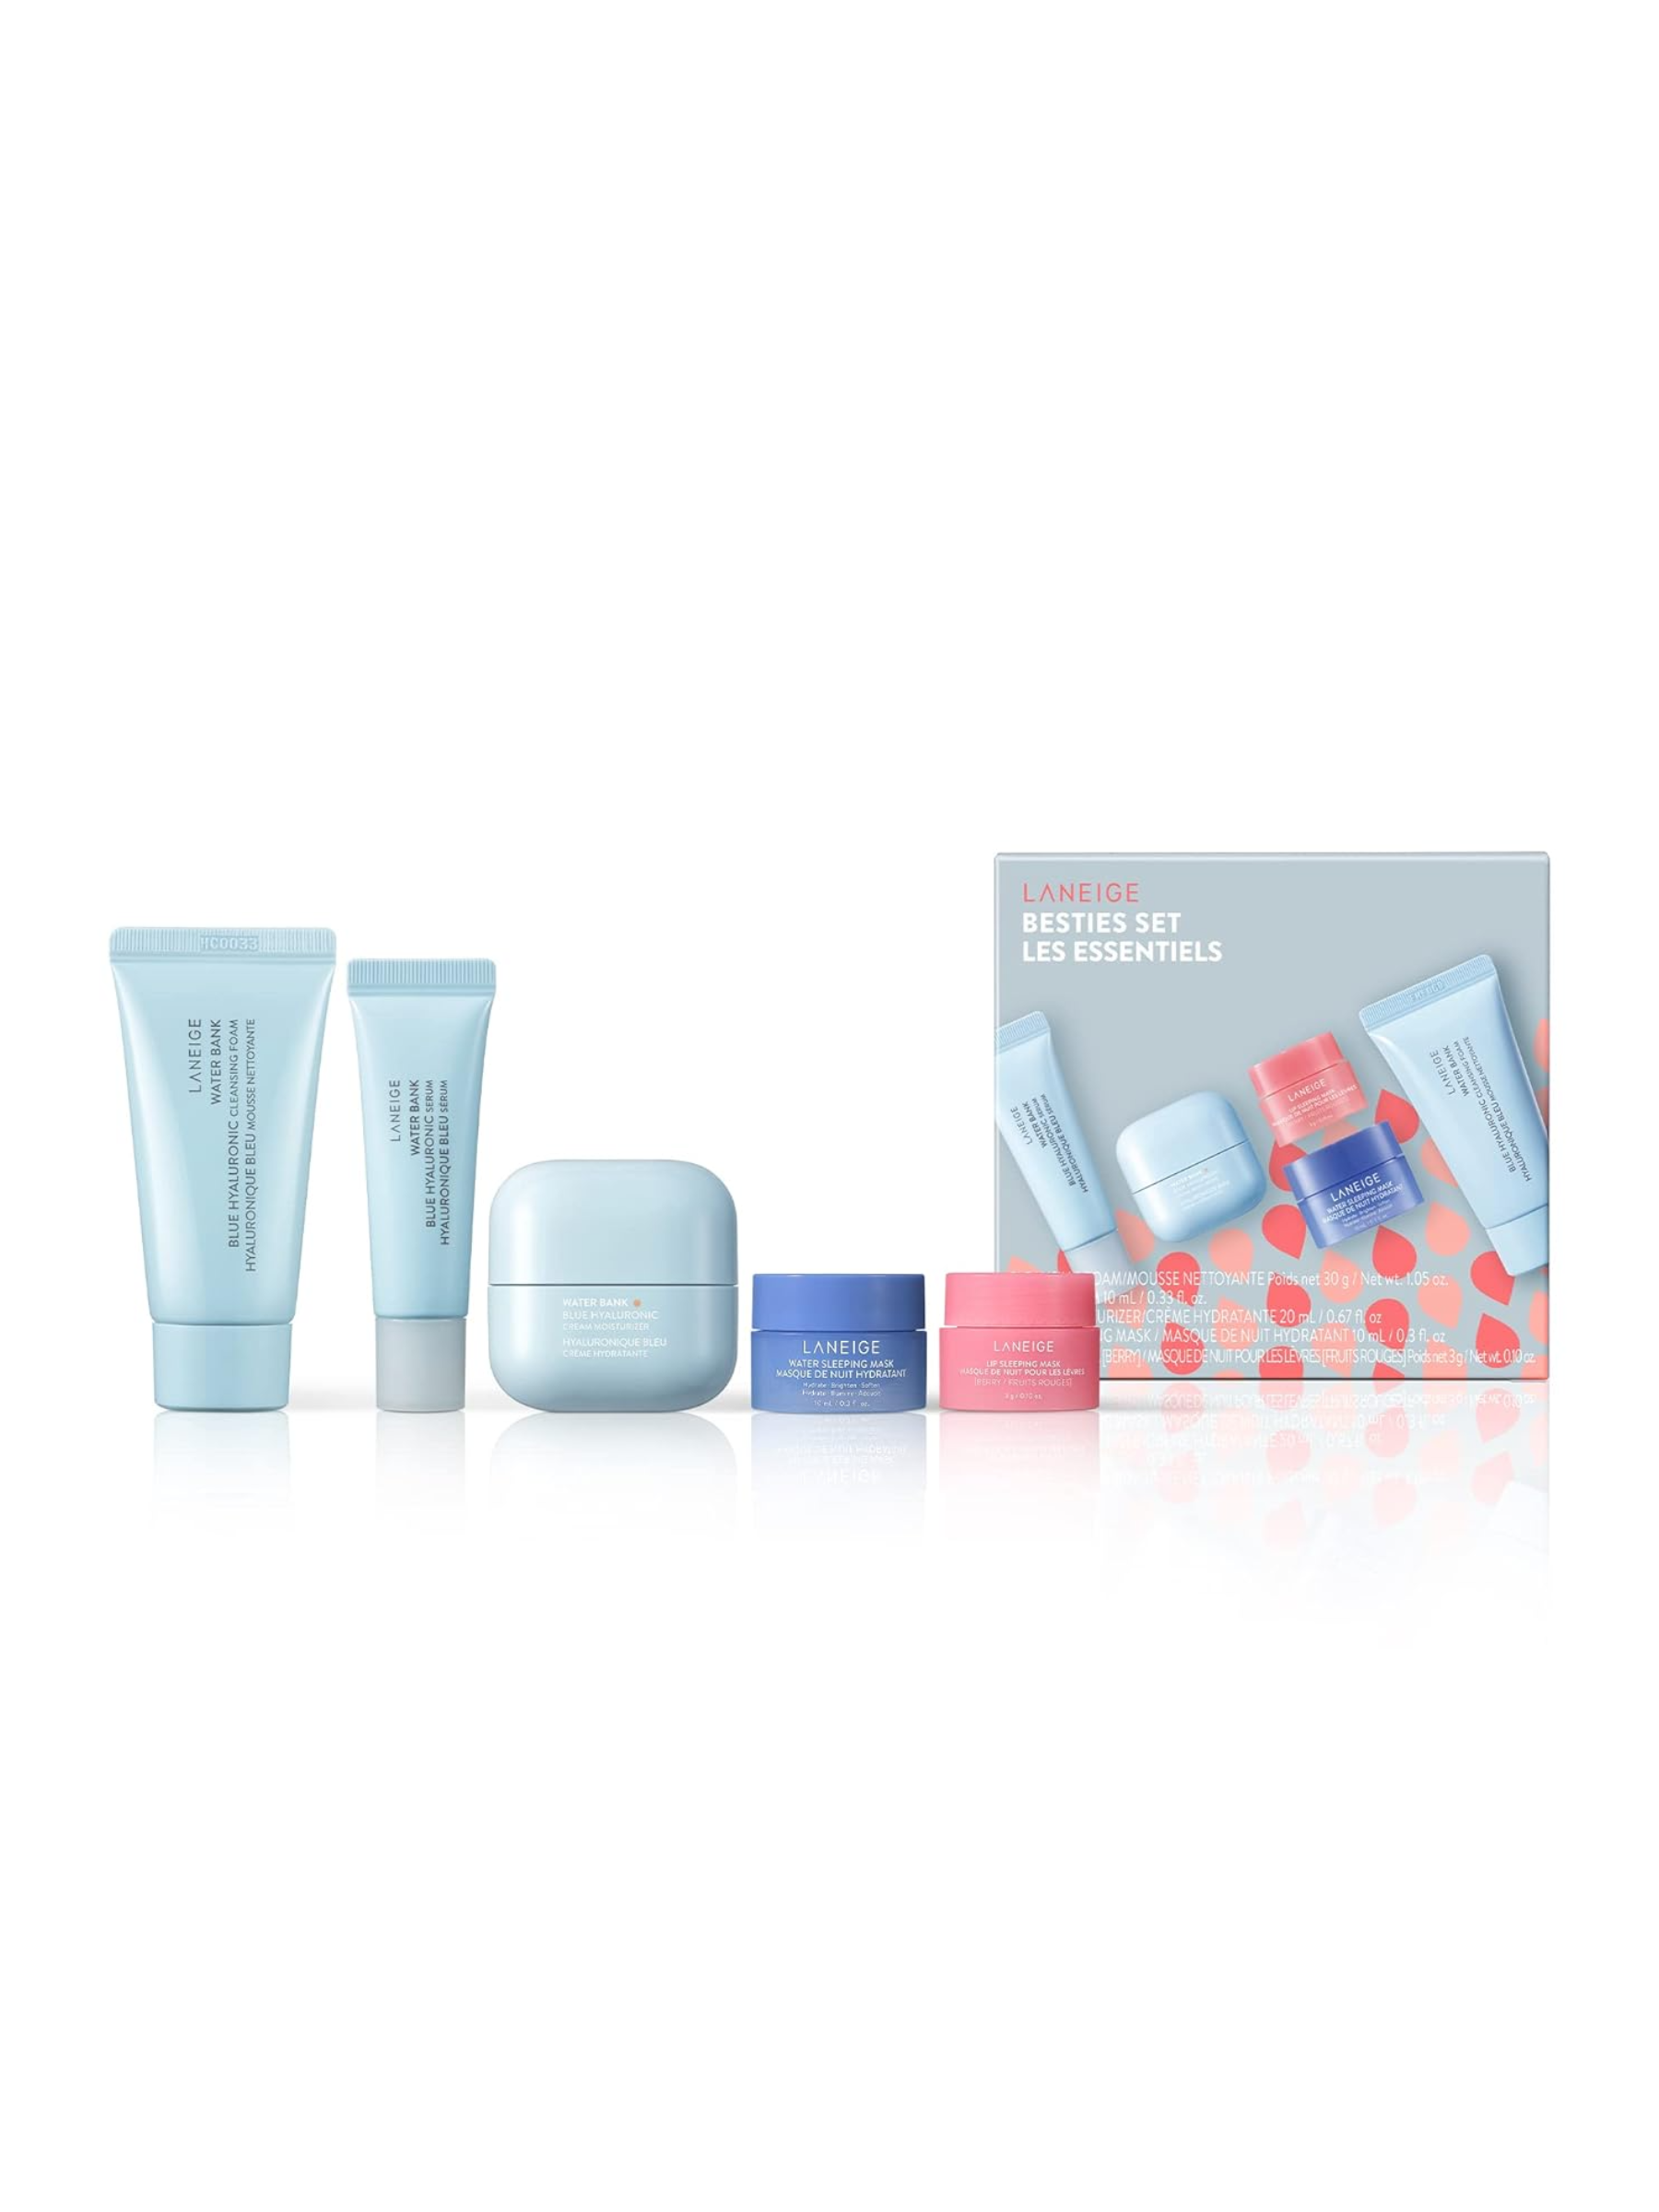 Stacked with all the right ingredients for their youthful skin, Laniege’s Besties Set will be a hit with the skin care girlies. The set comes with a hydrating cleanser, hyaluronic acid serum, moisturizing cream, and two of the brand’s fan-favorite <a href="https://www.glamour.com/story/laneige-lip-sleeping-mask-review?mbid=synd_msn_rss&utm_source=msn&utm_medium=syndication">lip sleeping masks</a>. $35, Amazon. <a href="https://www.amazon.com/dp/B0B835R2CZ?">Get it now!</a><p>Sign up for today’s biggest stories, from pop culture to politics.</p><a href="https://www.glamour.com/newsletter/news?sourceCode=msnsend">Sign Up</a>